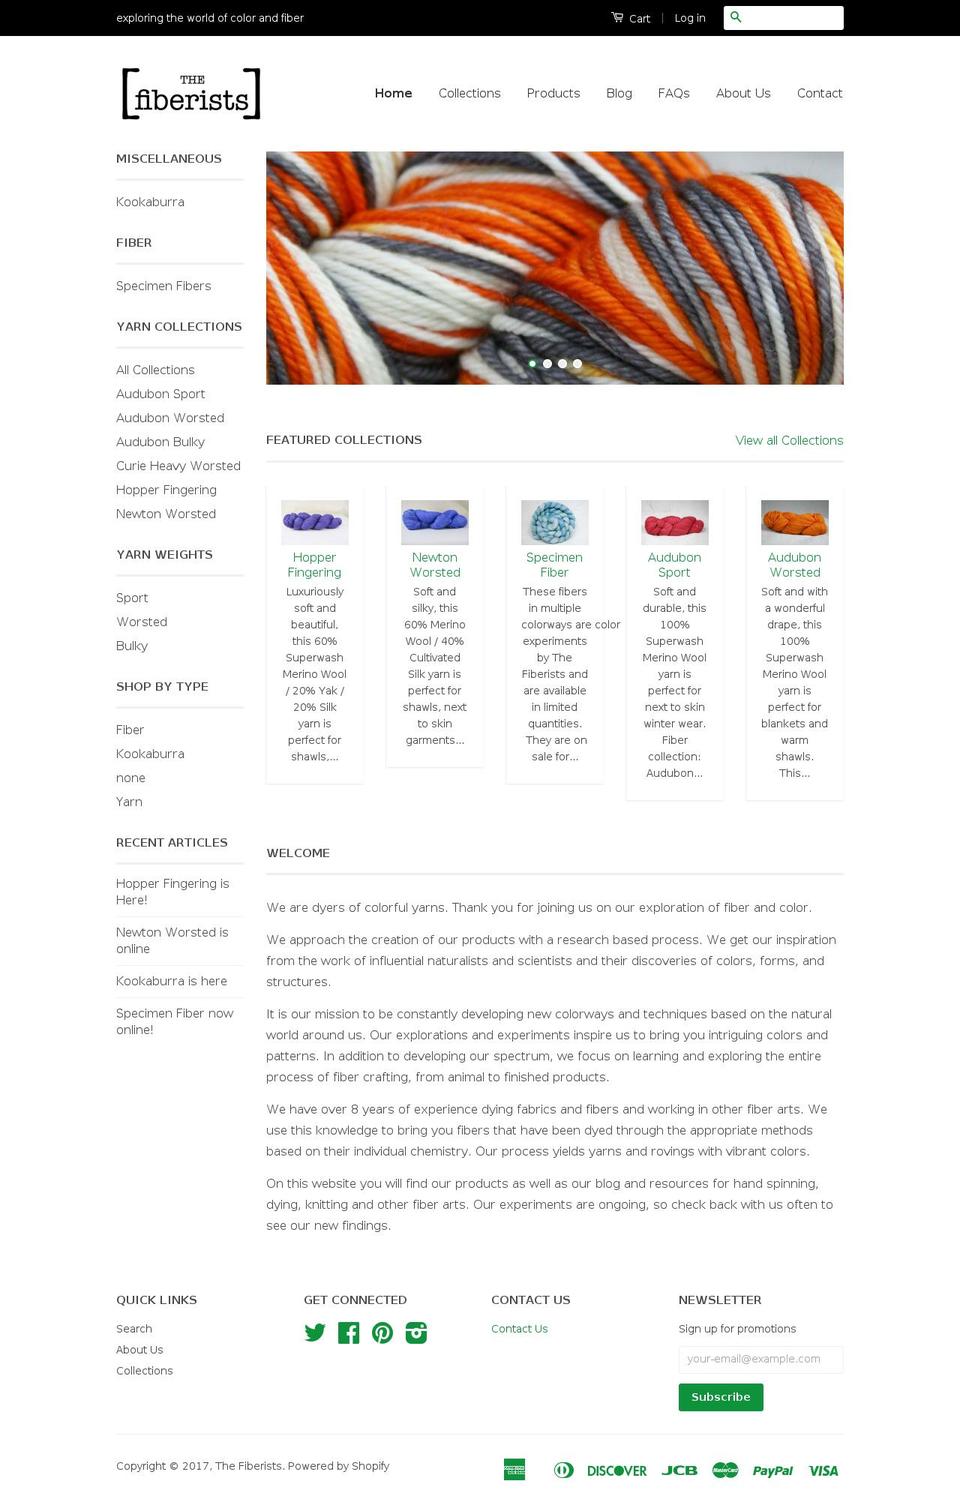 Goodwin Shopify theme site example thefiberists.com